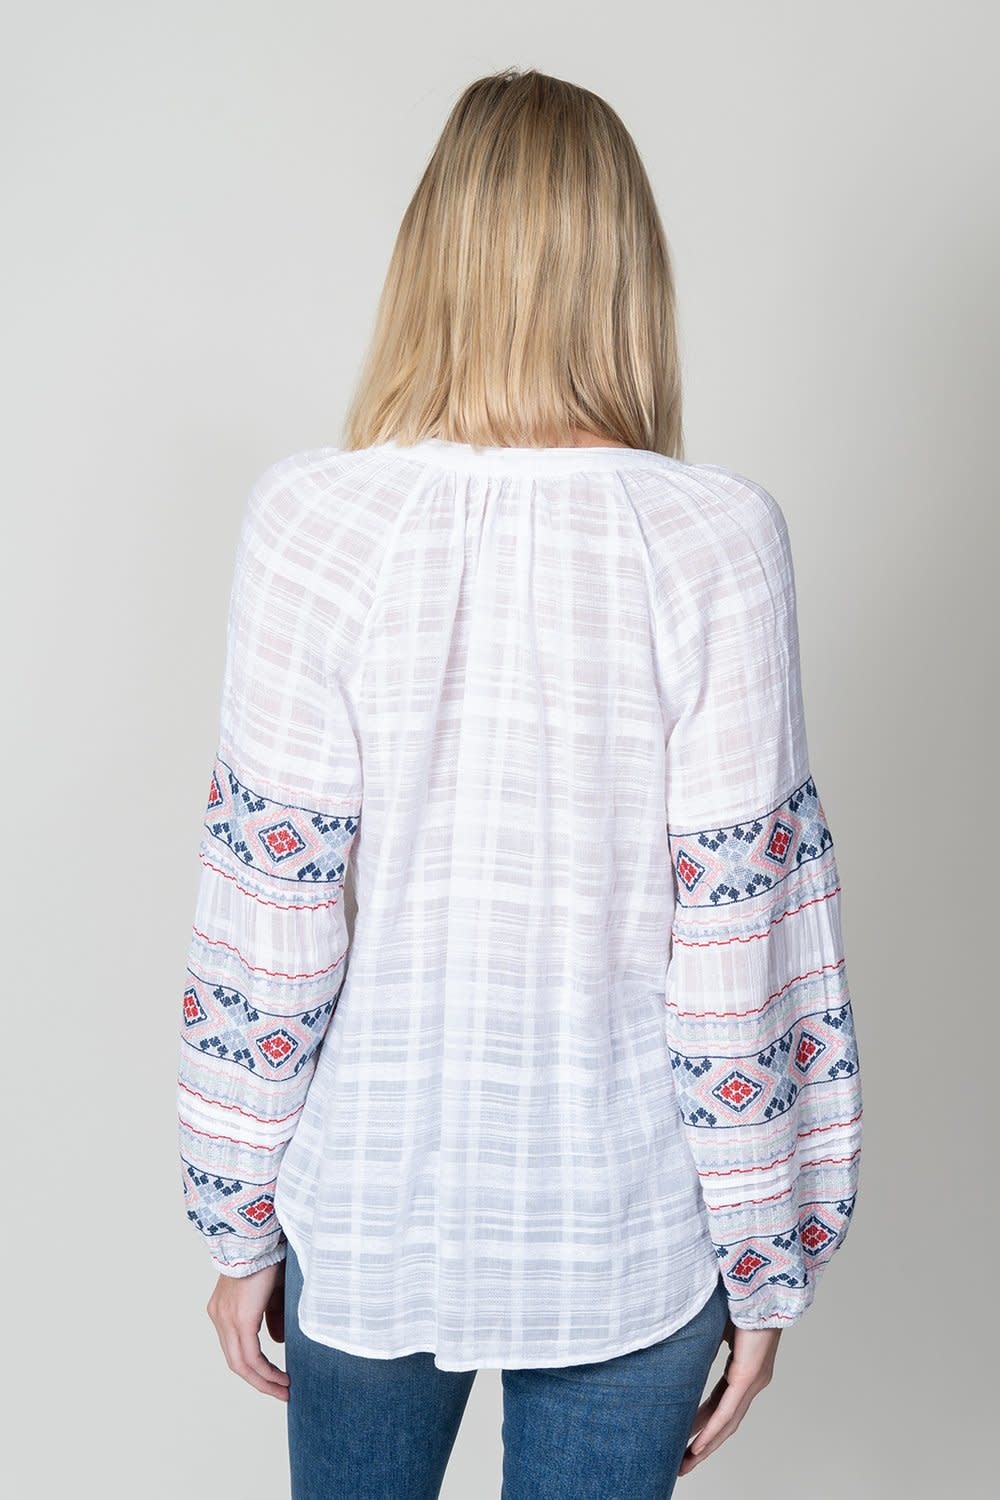 Dylan TALA EMBROIDERY TOP -